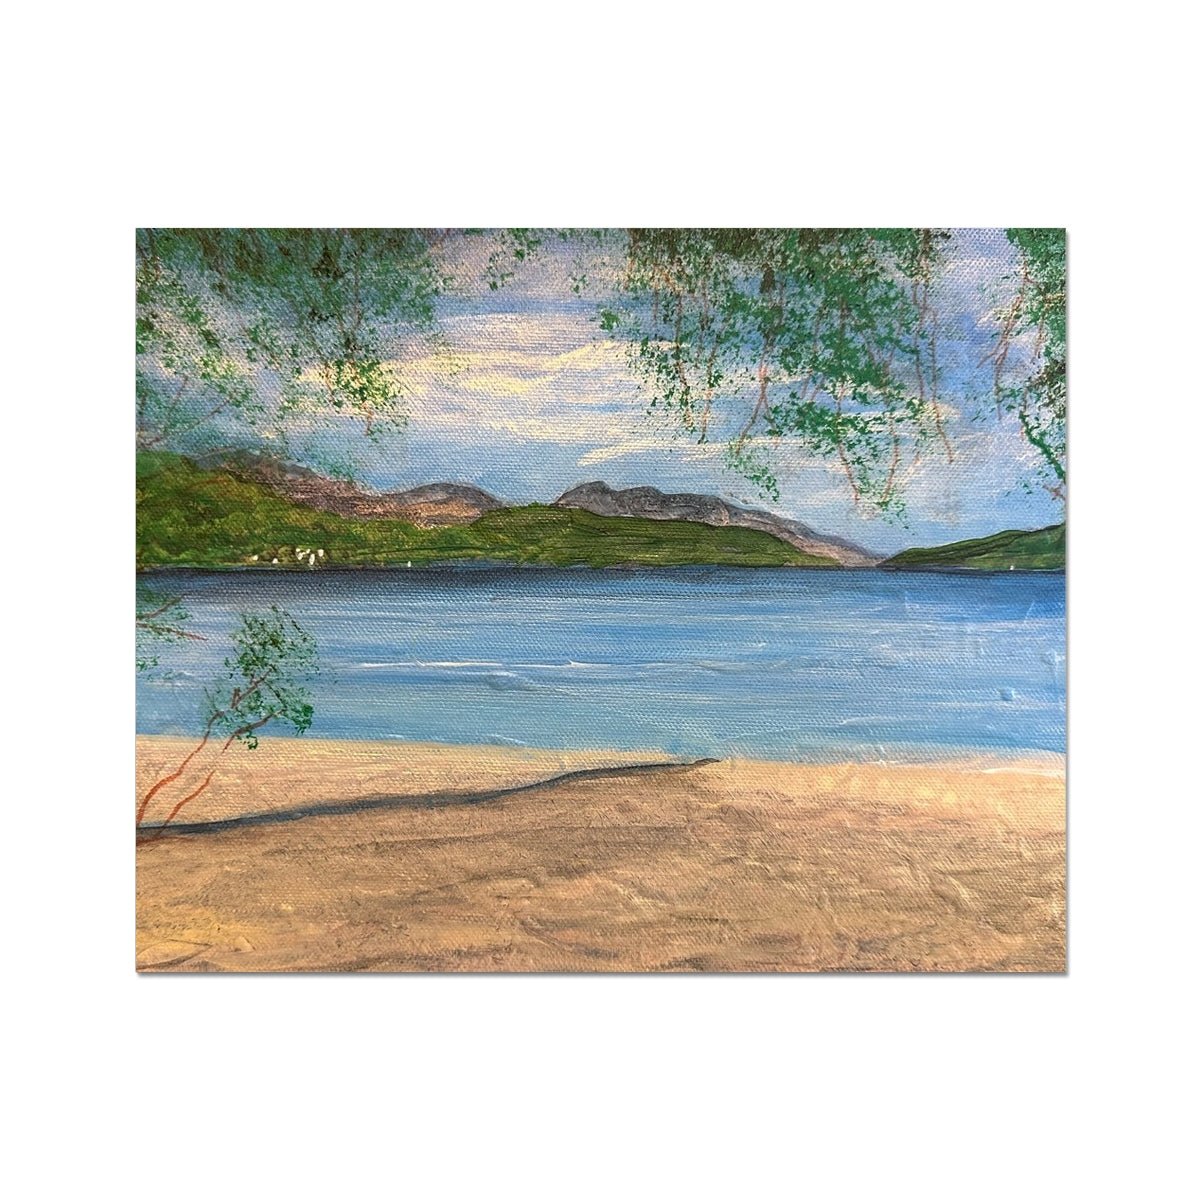 Firkin Point Loch Lomond Painting | Artist Proof Collector Prints From Scotland-Artist Proof Collector Prints-Scottish Lochs & Mountains Art Gallery-20"x16"-Paintings, Prints, Homeware, Art Gifts From Scotland By Scottish Artist Kevin Hunter